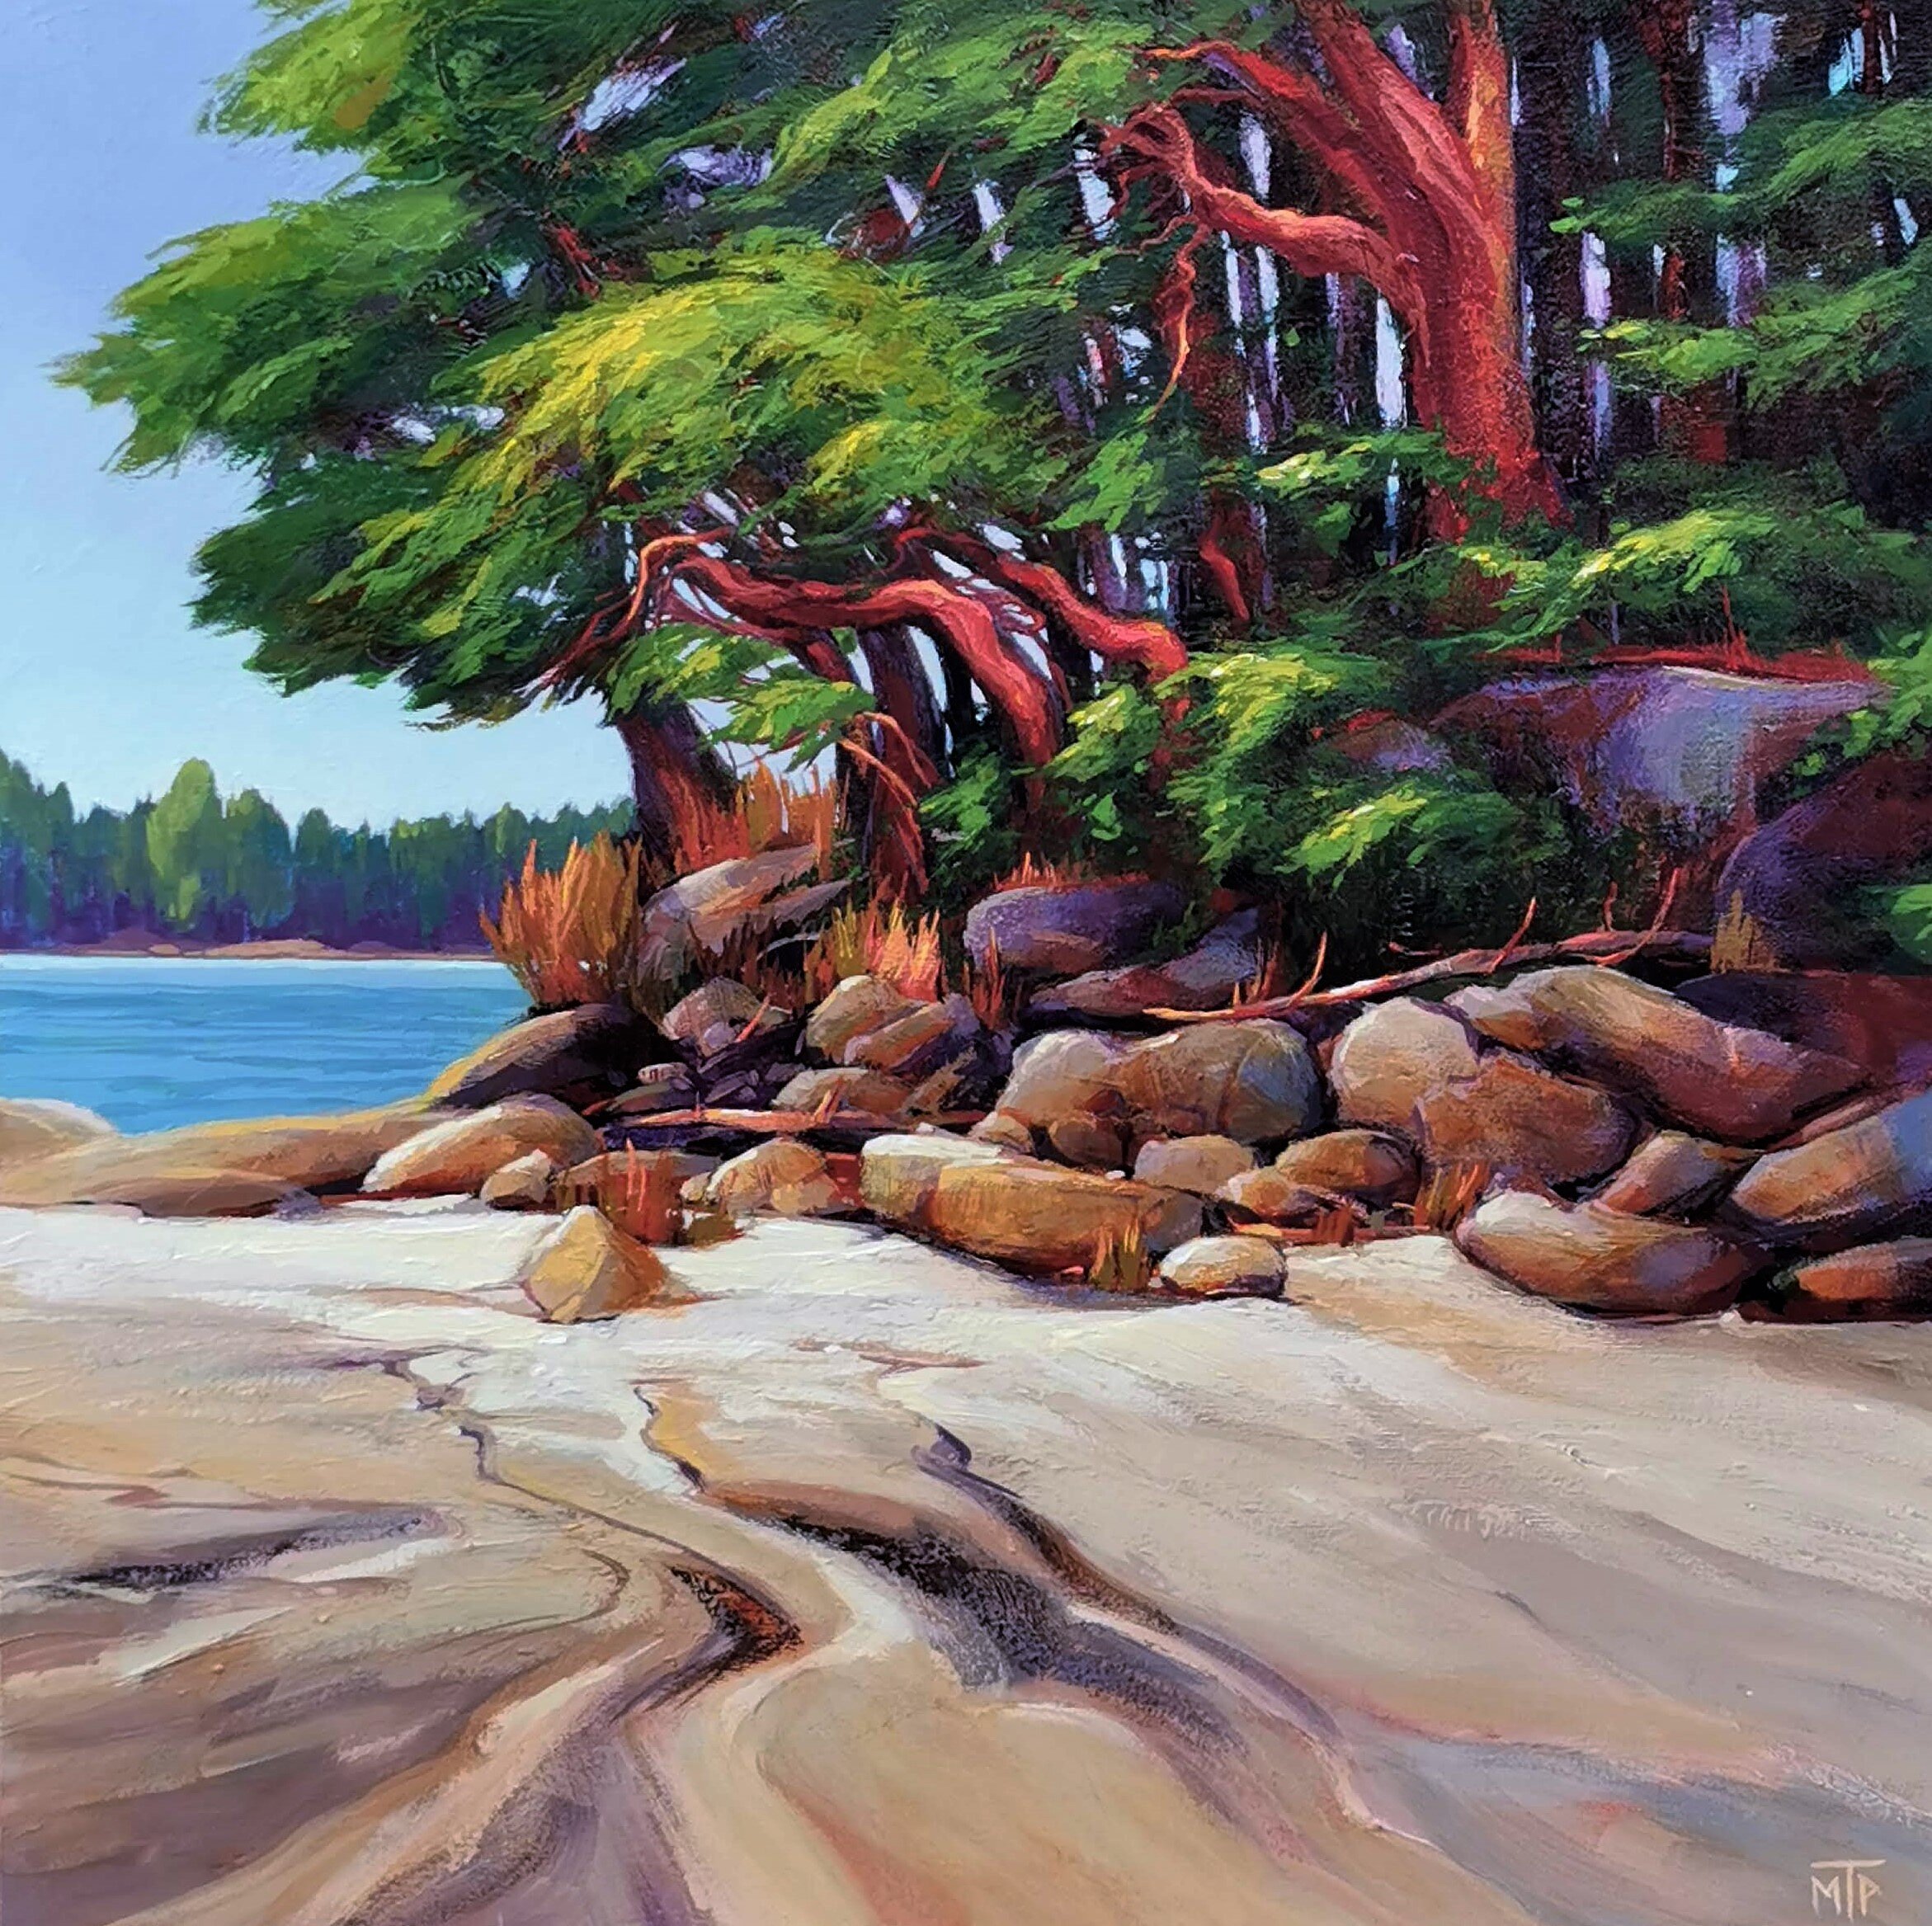  Arbutus Beach   Acrylic on canvas, 30x30 inches, Sold  